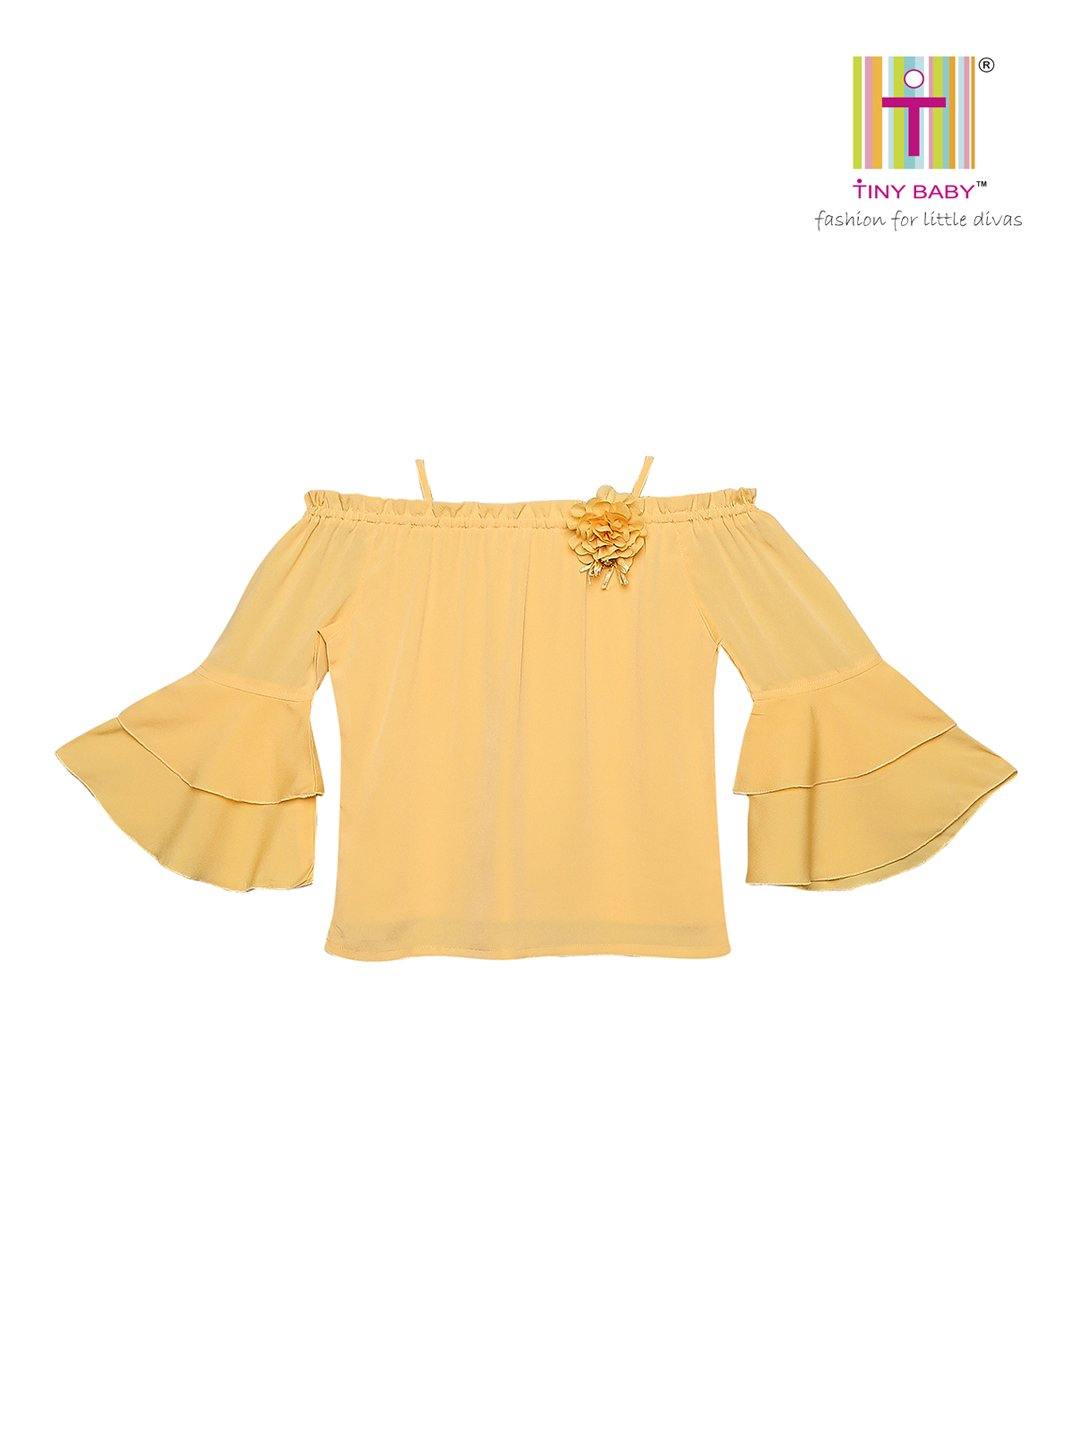 Tiny Baby Yellow Colored Top - TINY BABY INDIA shop.tinybaby.in